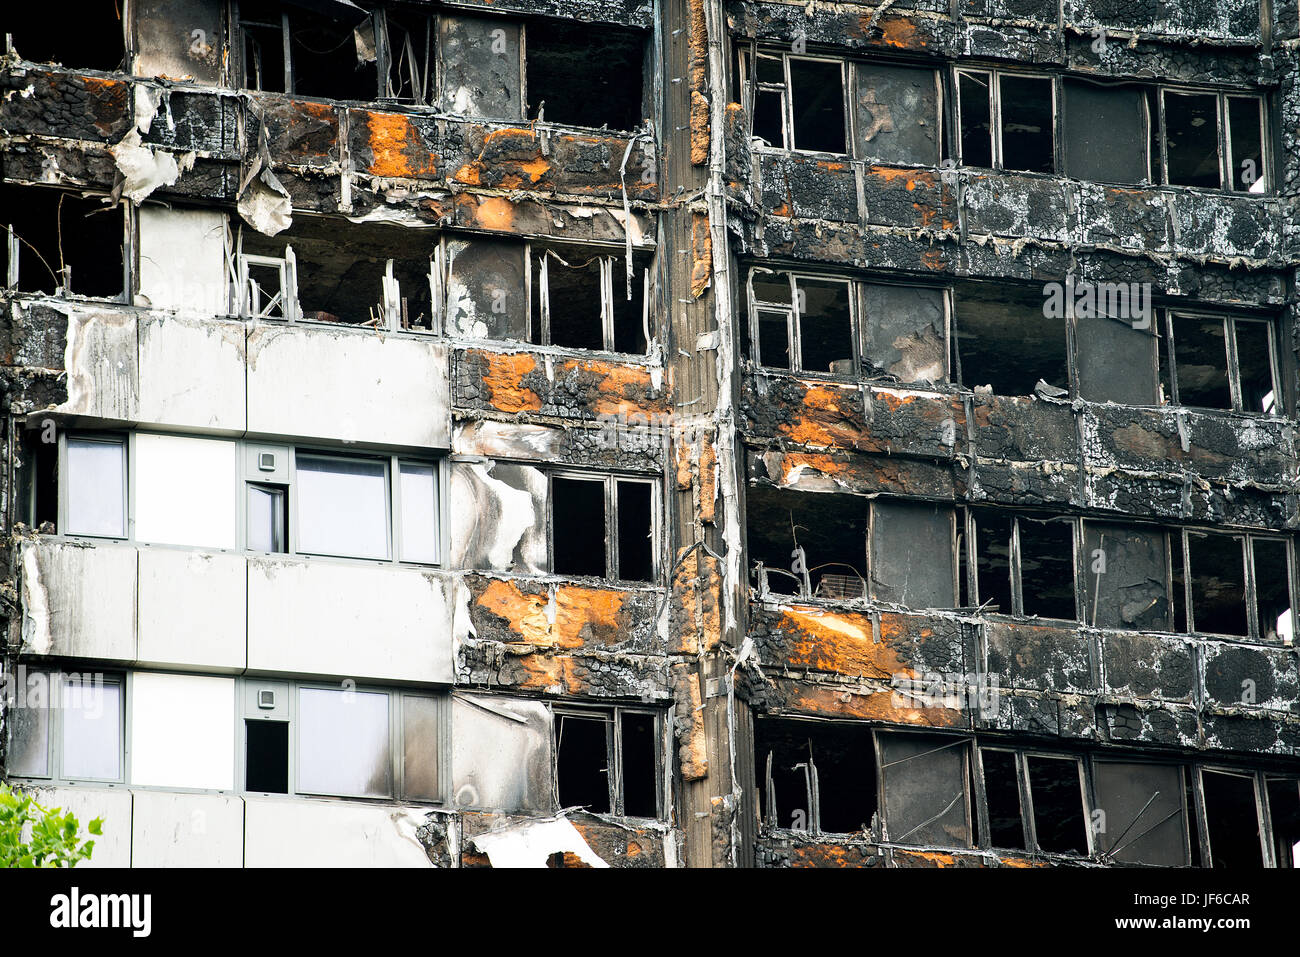 The burnt remains & devastation caused by fire, which ripped through the Grenfell Tower block leaving hundreds homeless and many dead or missing. Stock Photo